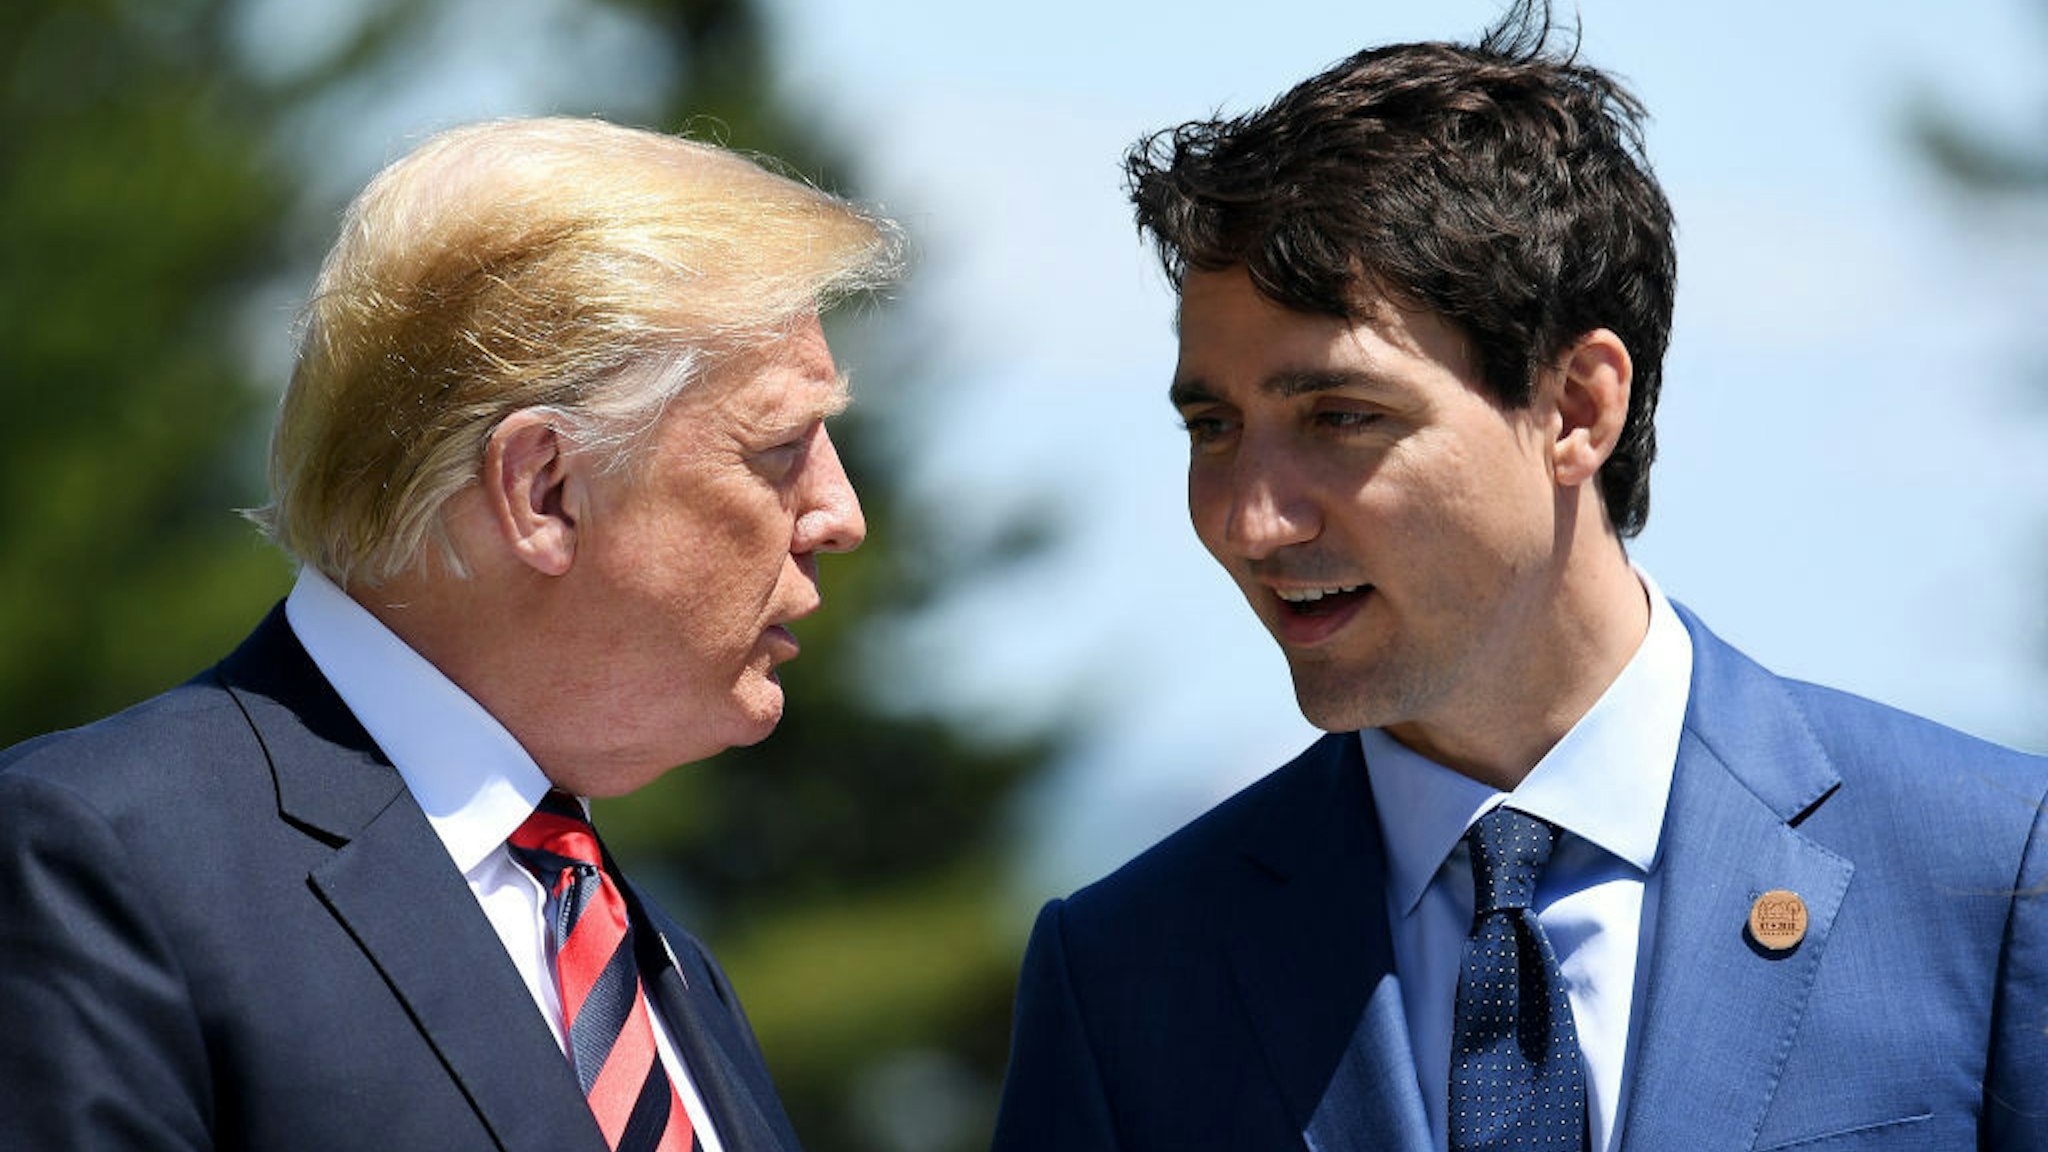 Prime Minister of Canada Justin Trudeau (R) speaks with U.S. President Donald Trump during the G7 official welcome at Le Manoir Richelieu on day one of the G7 meeting on June 8, 2018 in Quebec City, Canada. Canada will host the leaders of the UK, Italy, the US, France, Germany and Japan for the two day summit, in the town of La Malbaie. (Photo by Leon Neal/Getty Images)